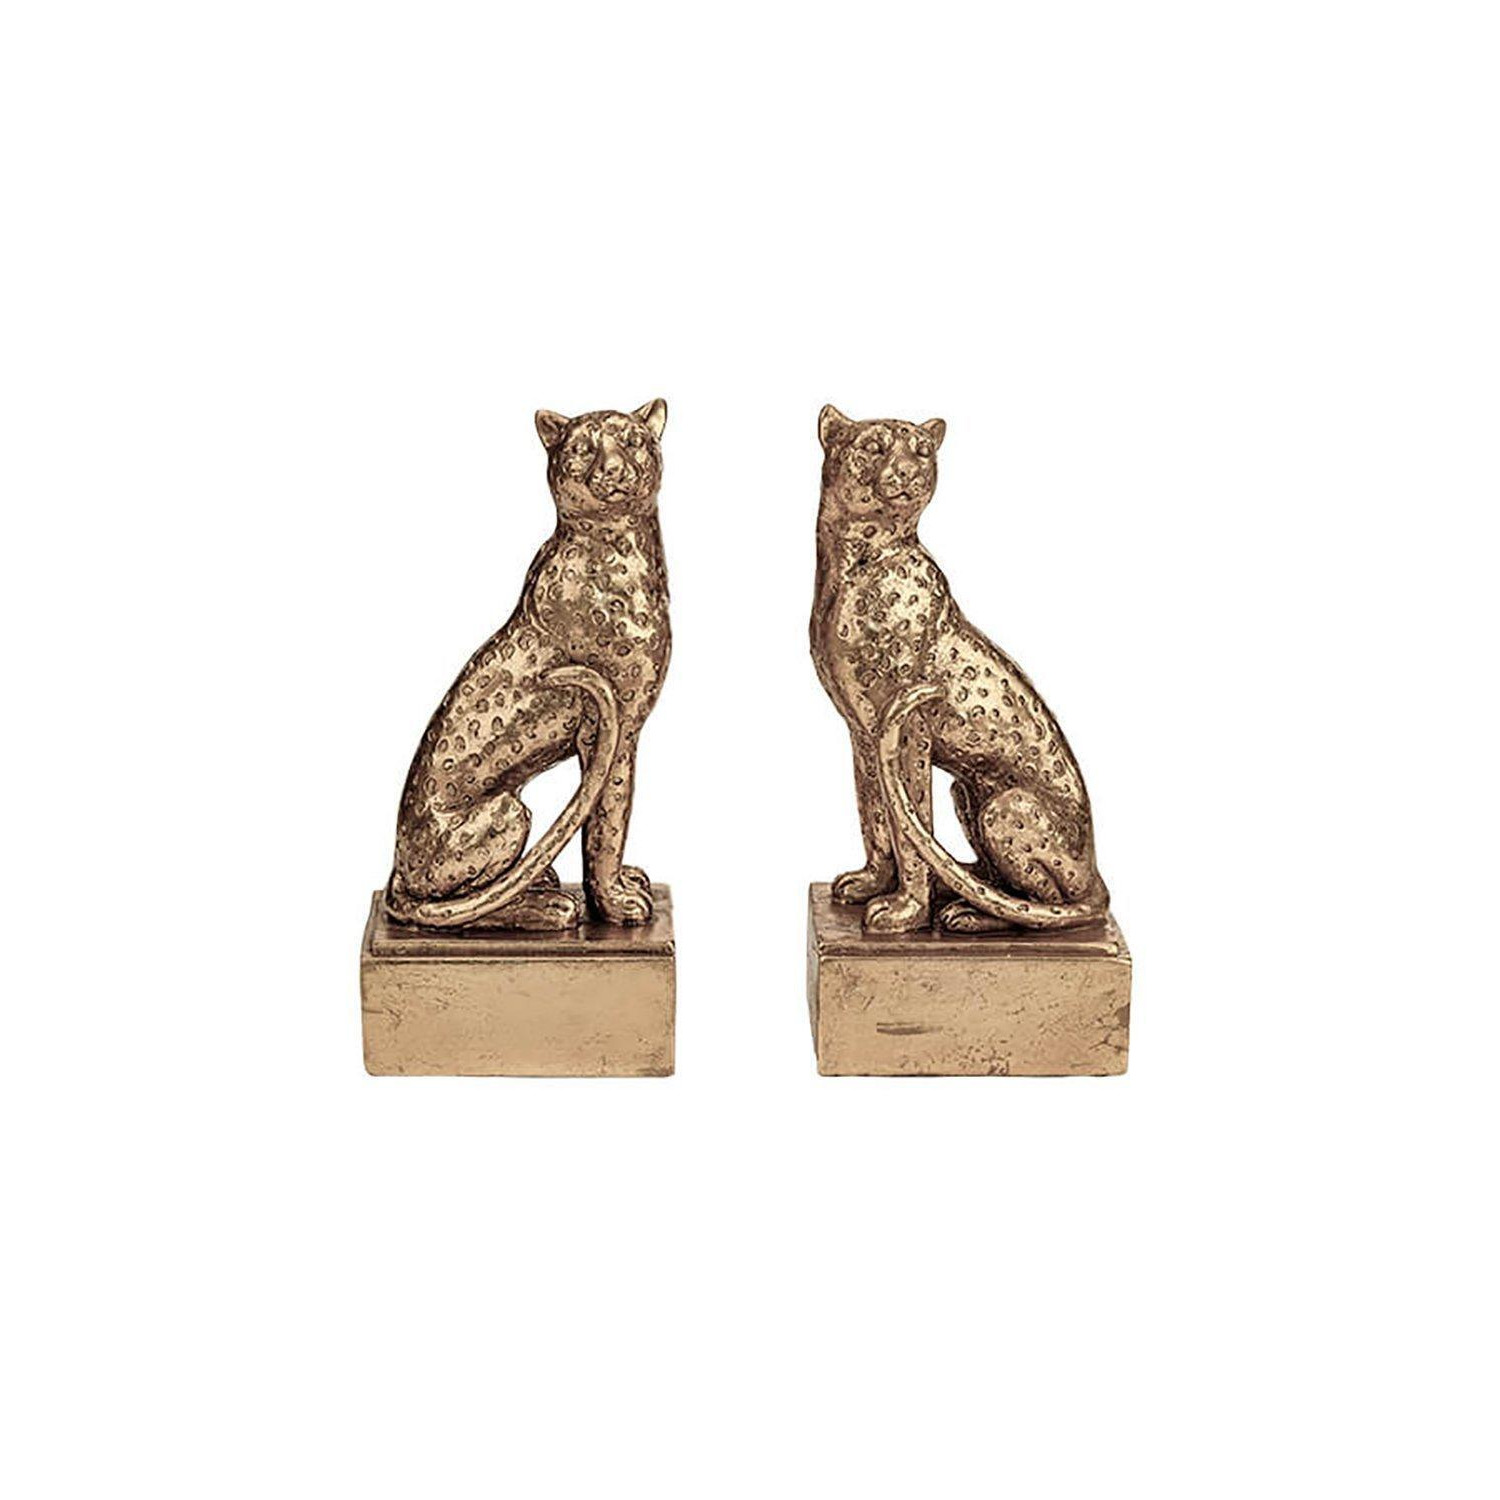 Leopard Bookends - image 1